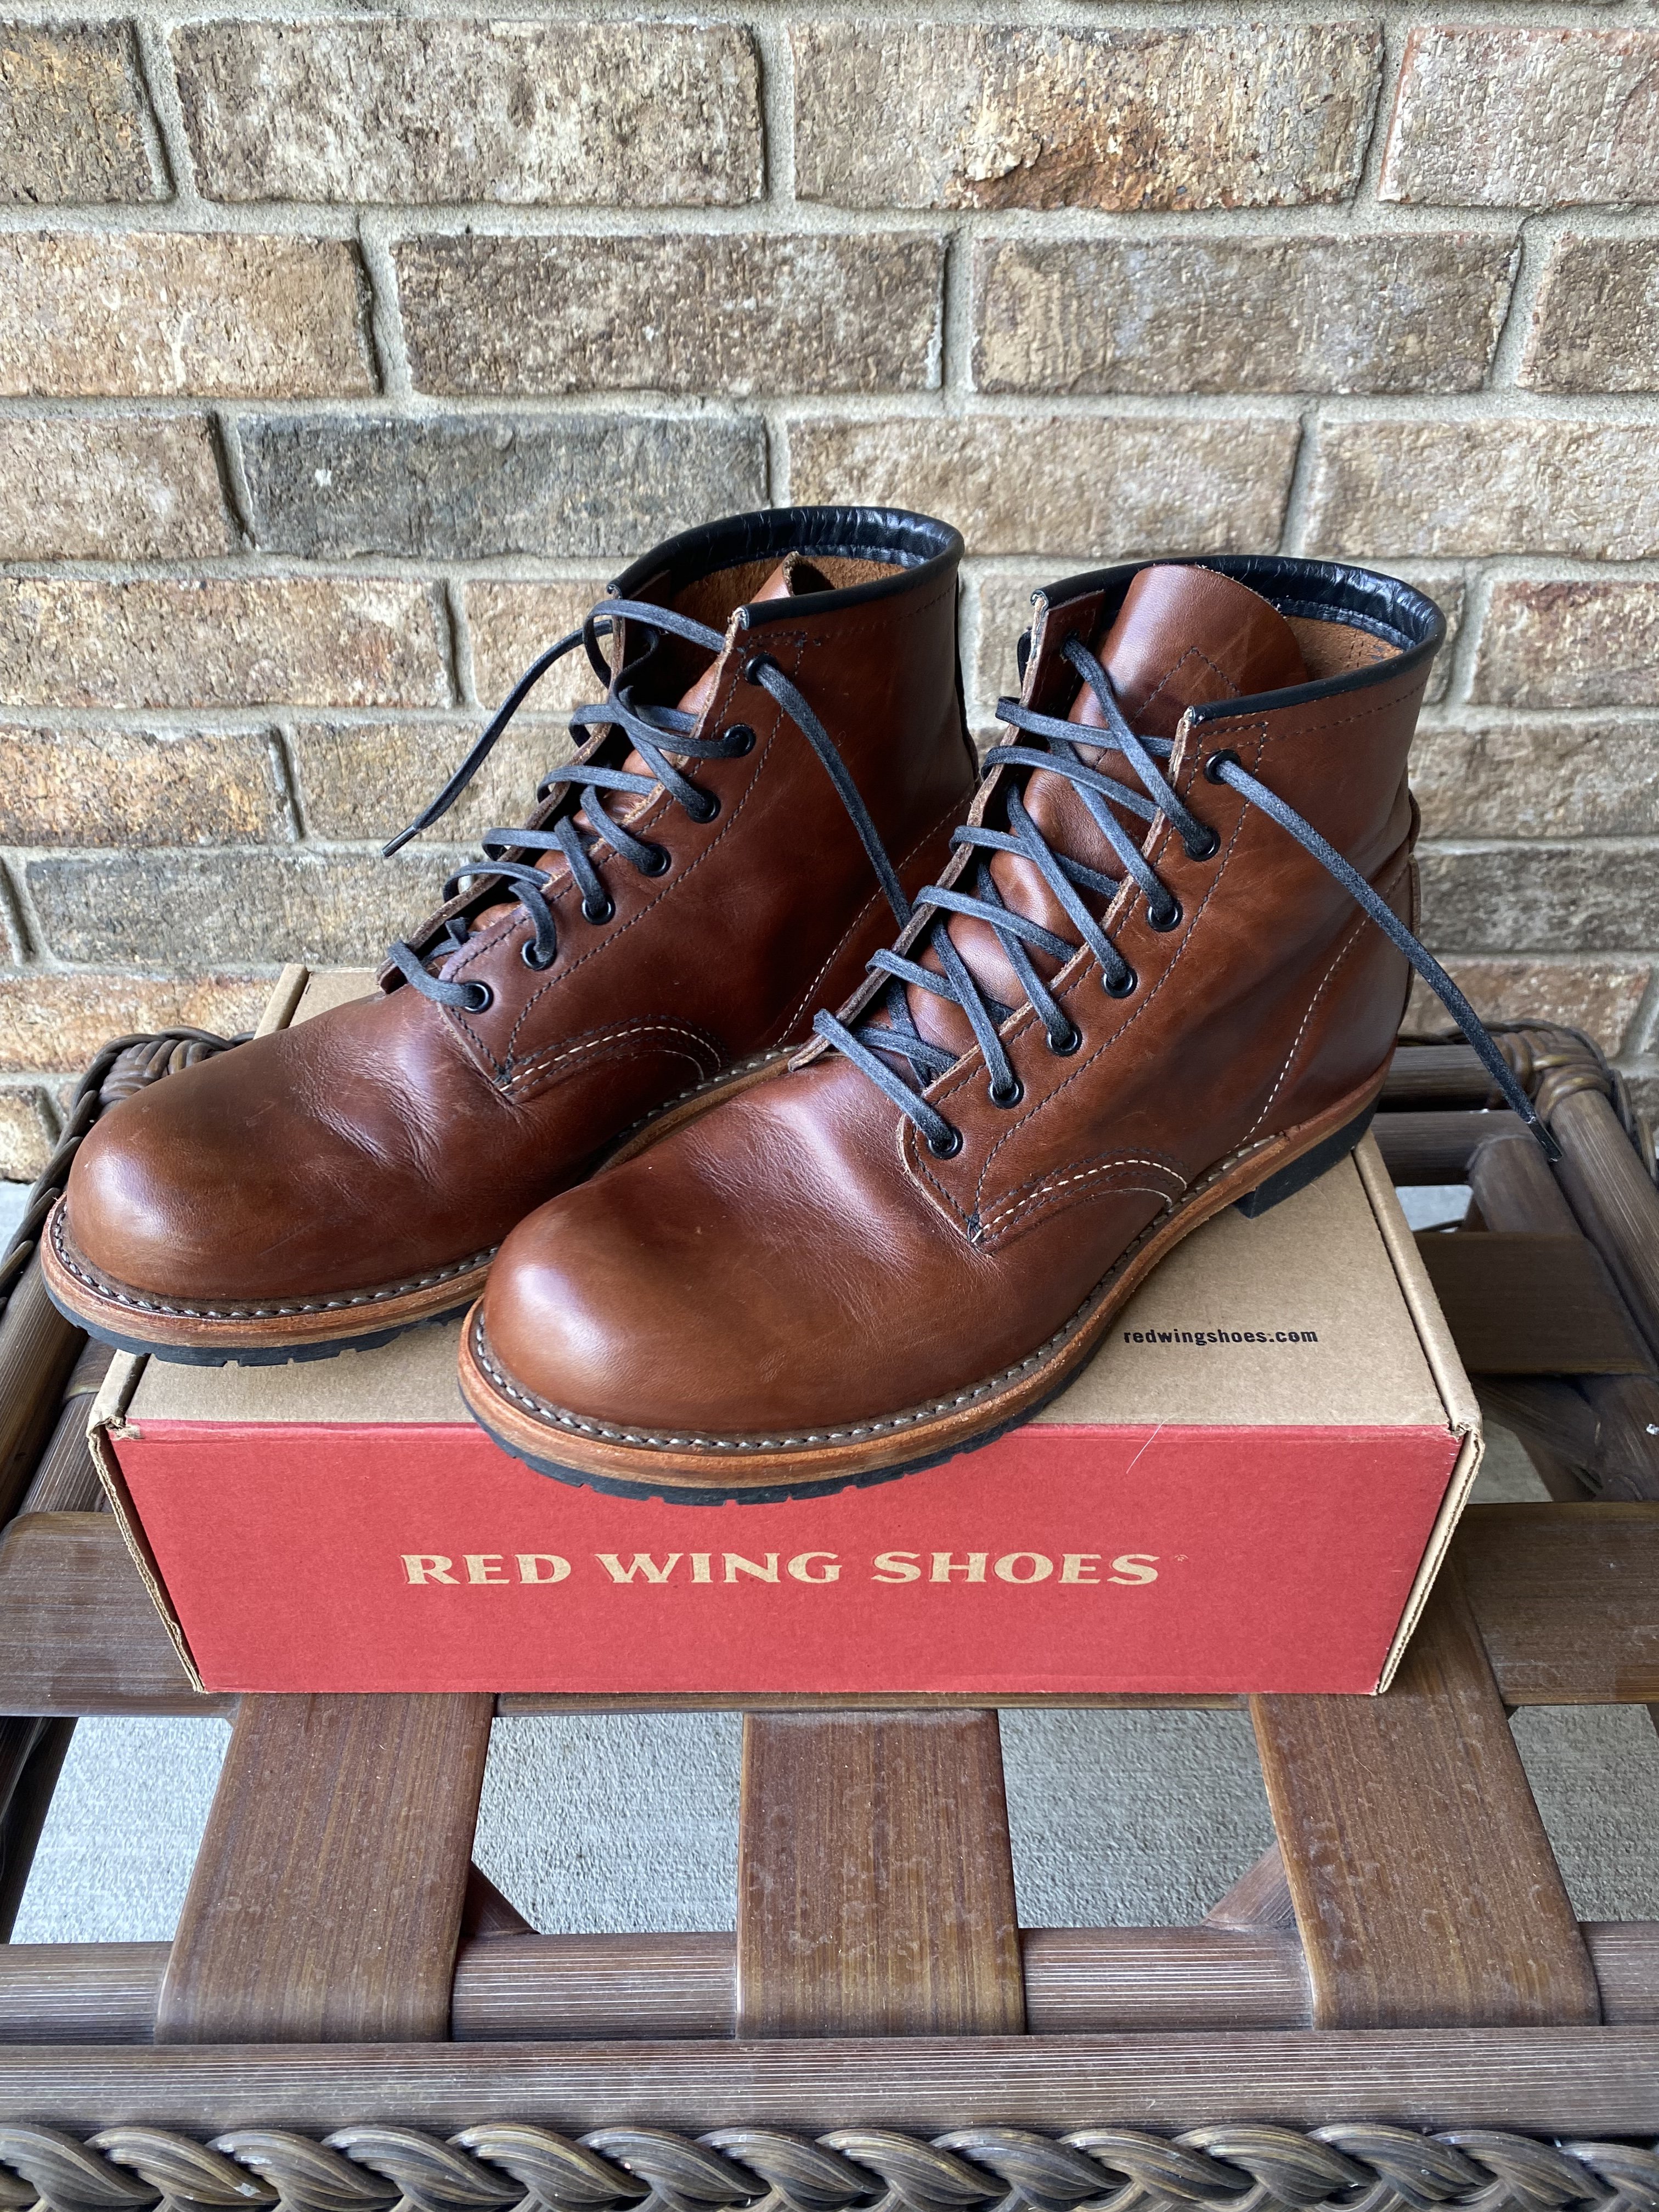 assimilation Symphony Persuasion Red Wing Beckman Cigar 9016 size 9 US | The Fedora Lounge